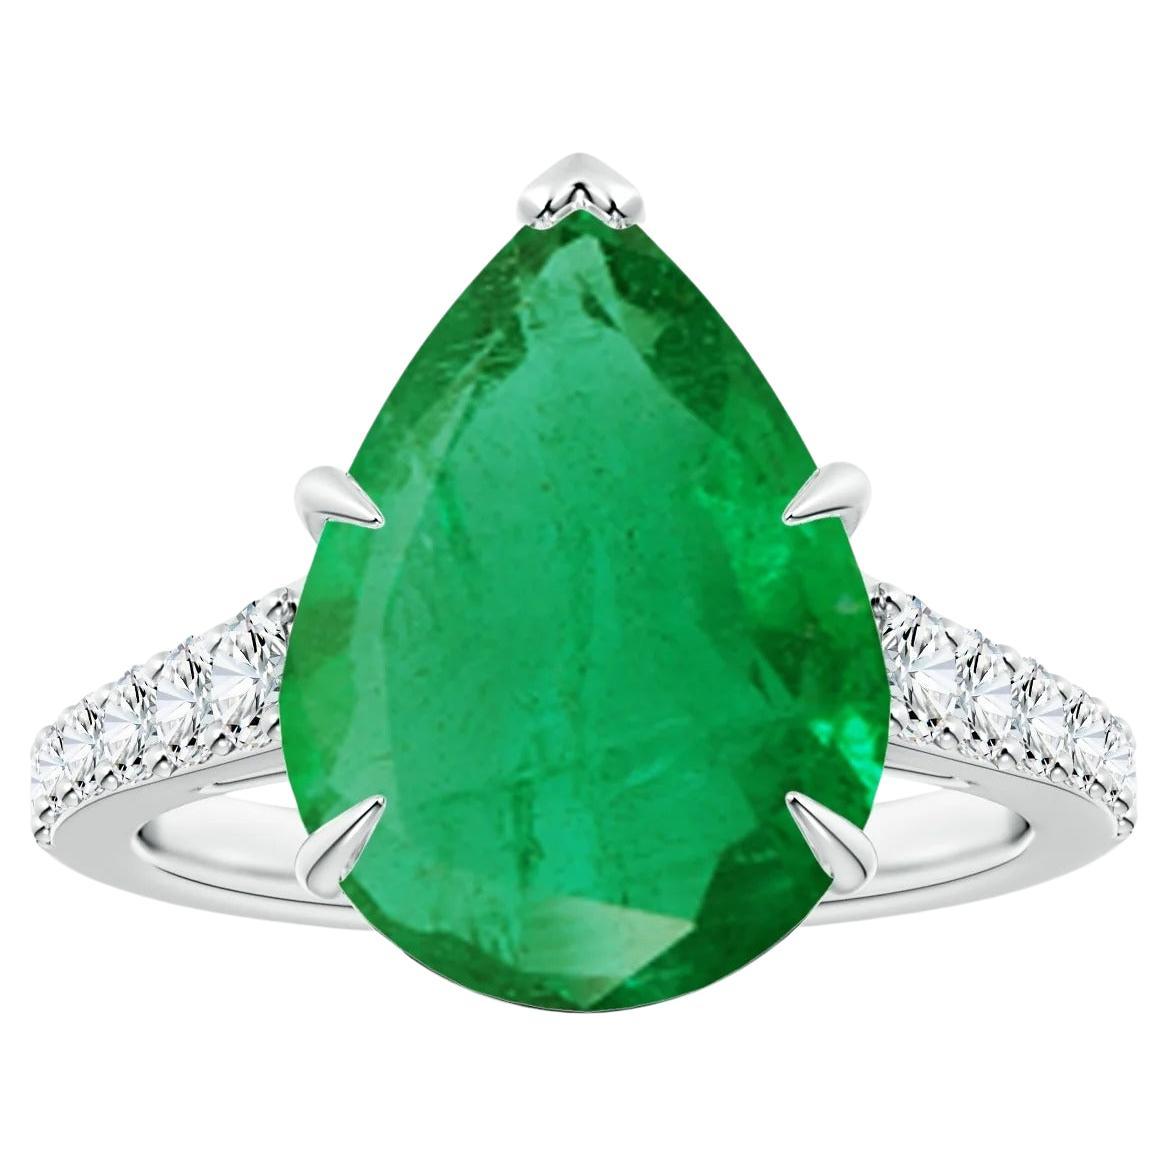 ANGARA GIA Certified Pear-Shaped Emerald Ring in Platinum with Diamonds